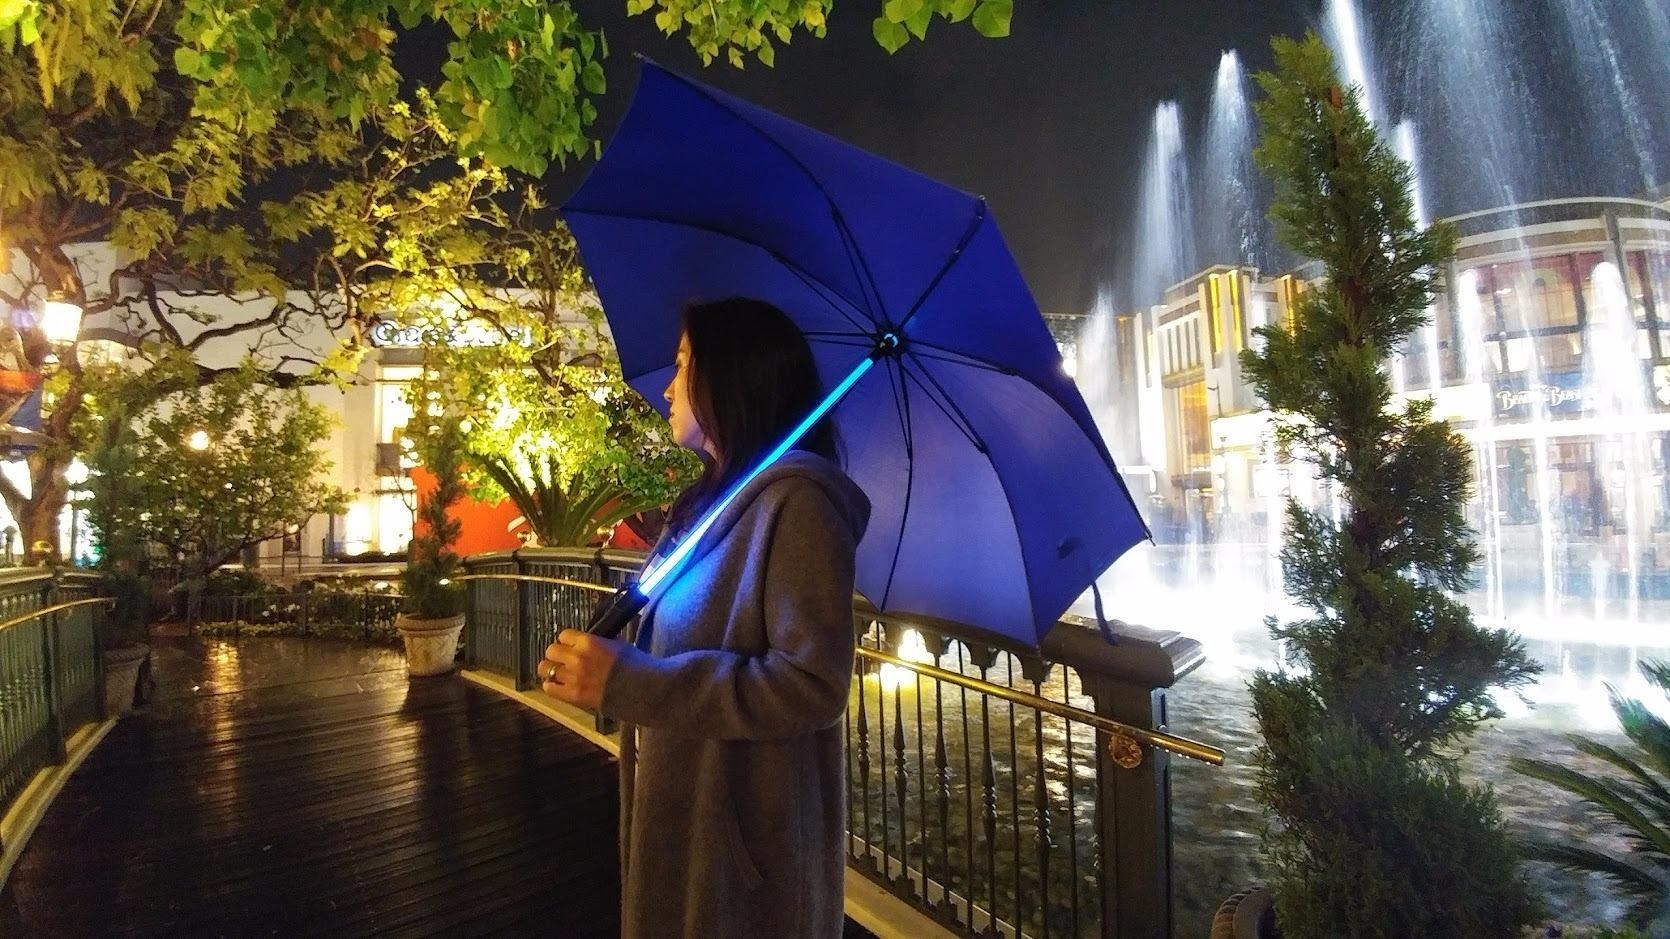 A person holding the umbrella, which has a shaft that glows like a lightsaber